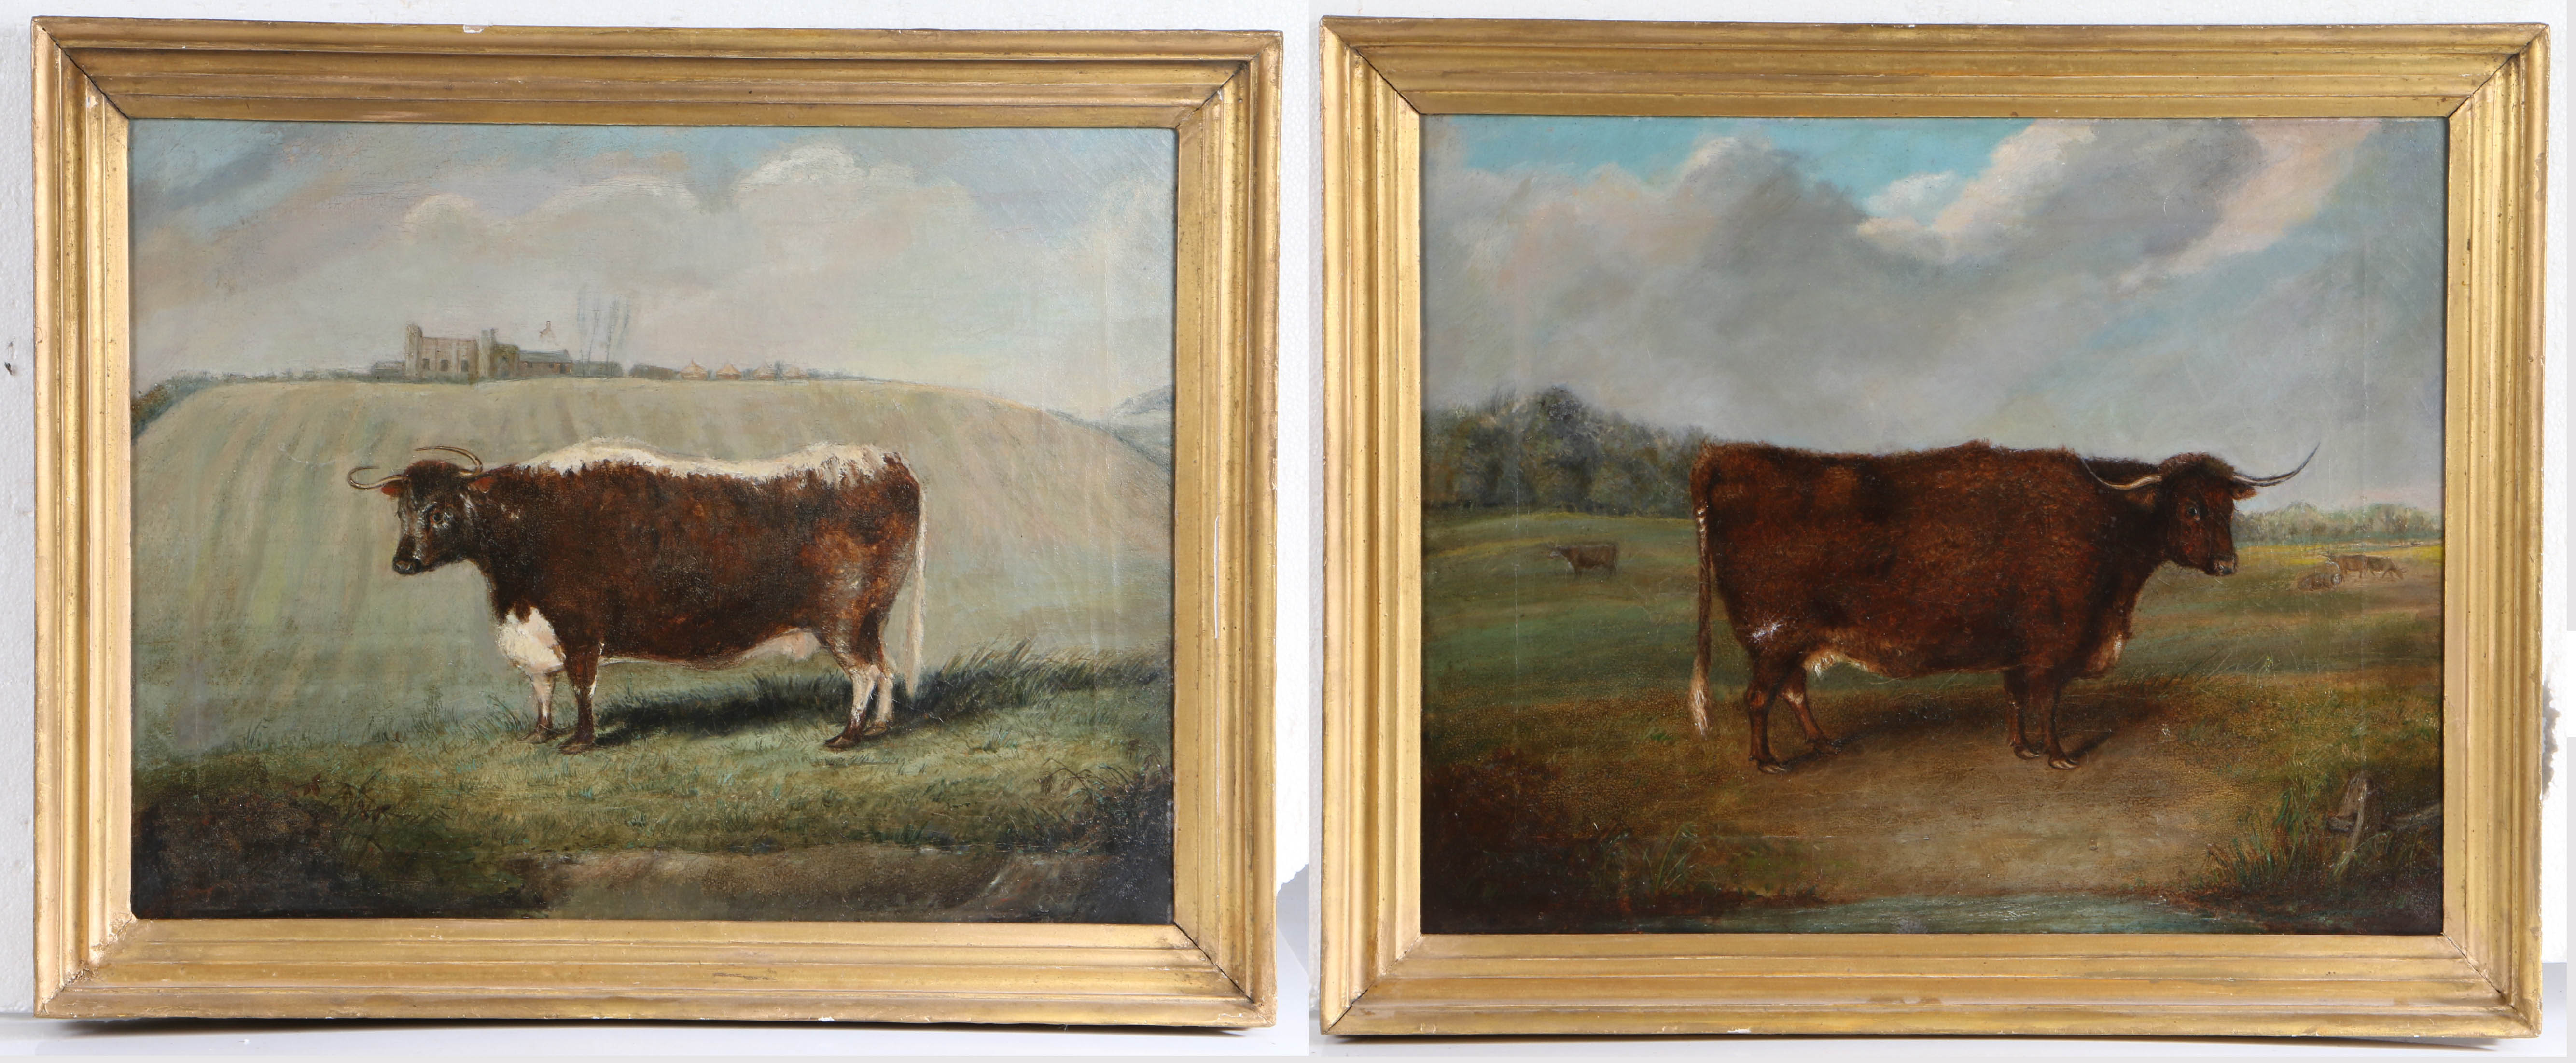 English School (19th Century) Primitive Longhorn Cows in Landscape pair of oils on canvas 42 x